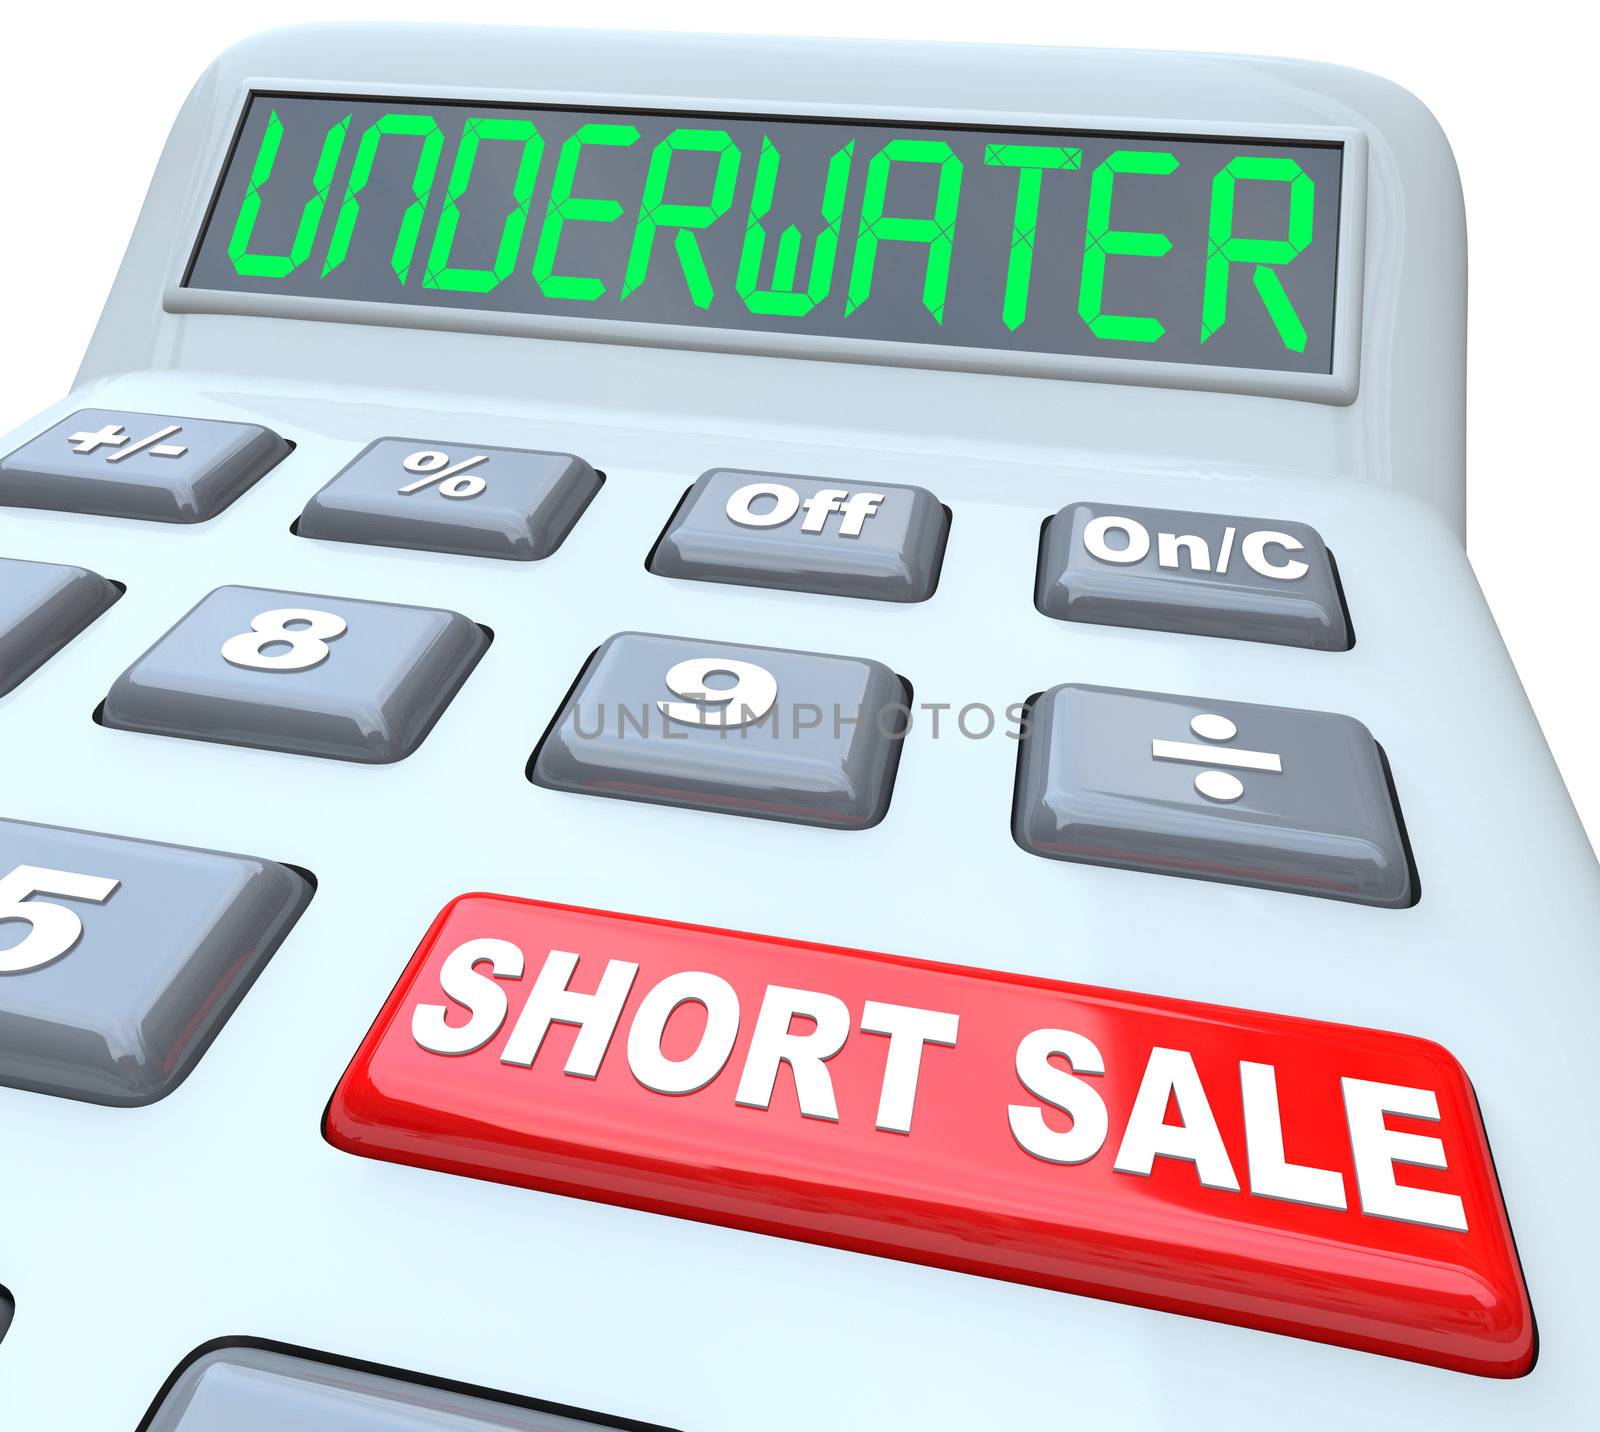 The word Underwater on a calculator digital display, symbolizing a home value being less than what is owed, and the words Short Sale on a red button symbolizing a solution to the problem